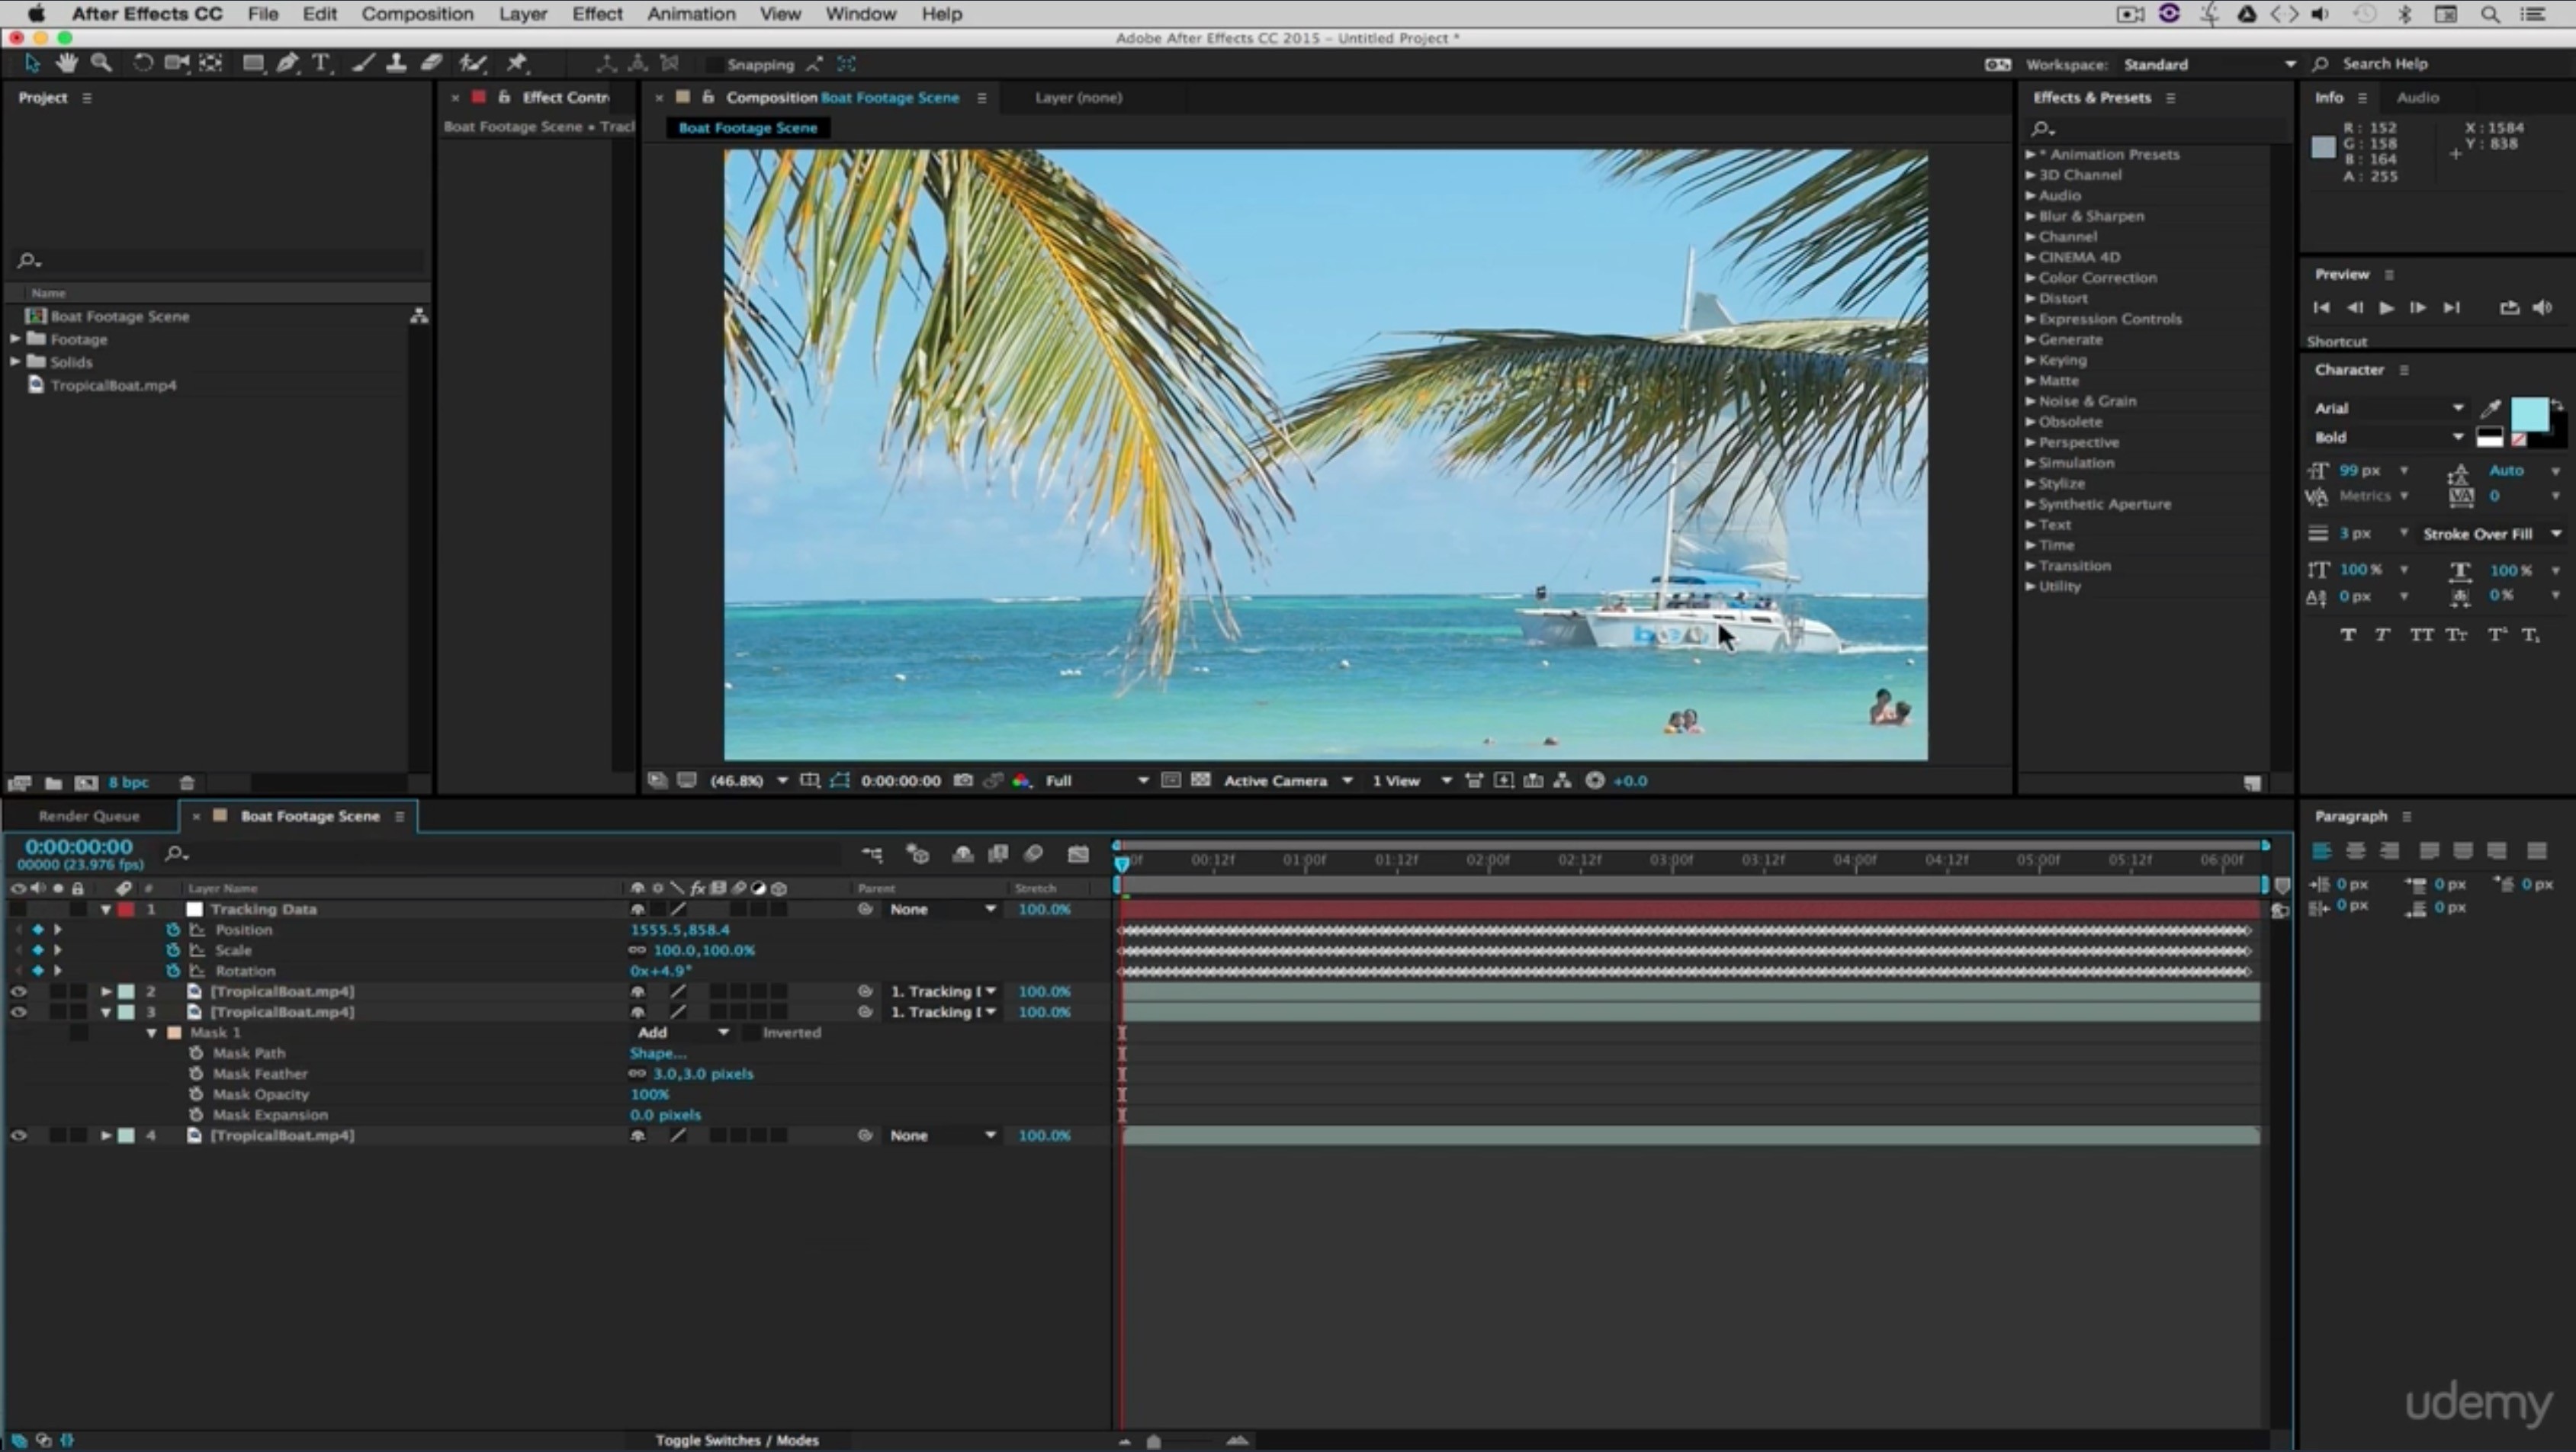 Adobe After Effects CC 2017 14.0.1